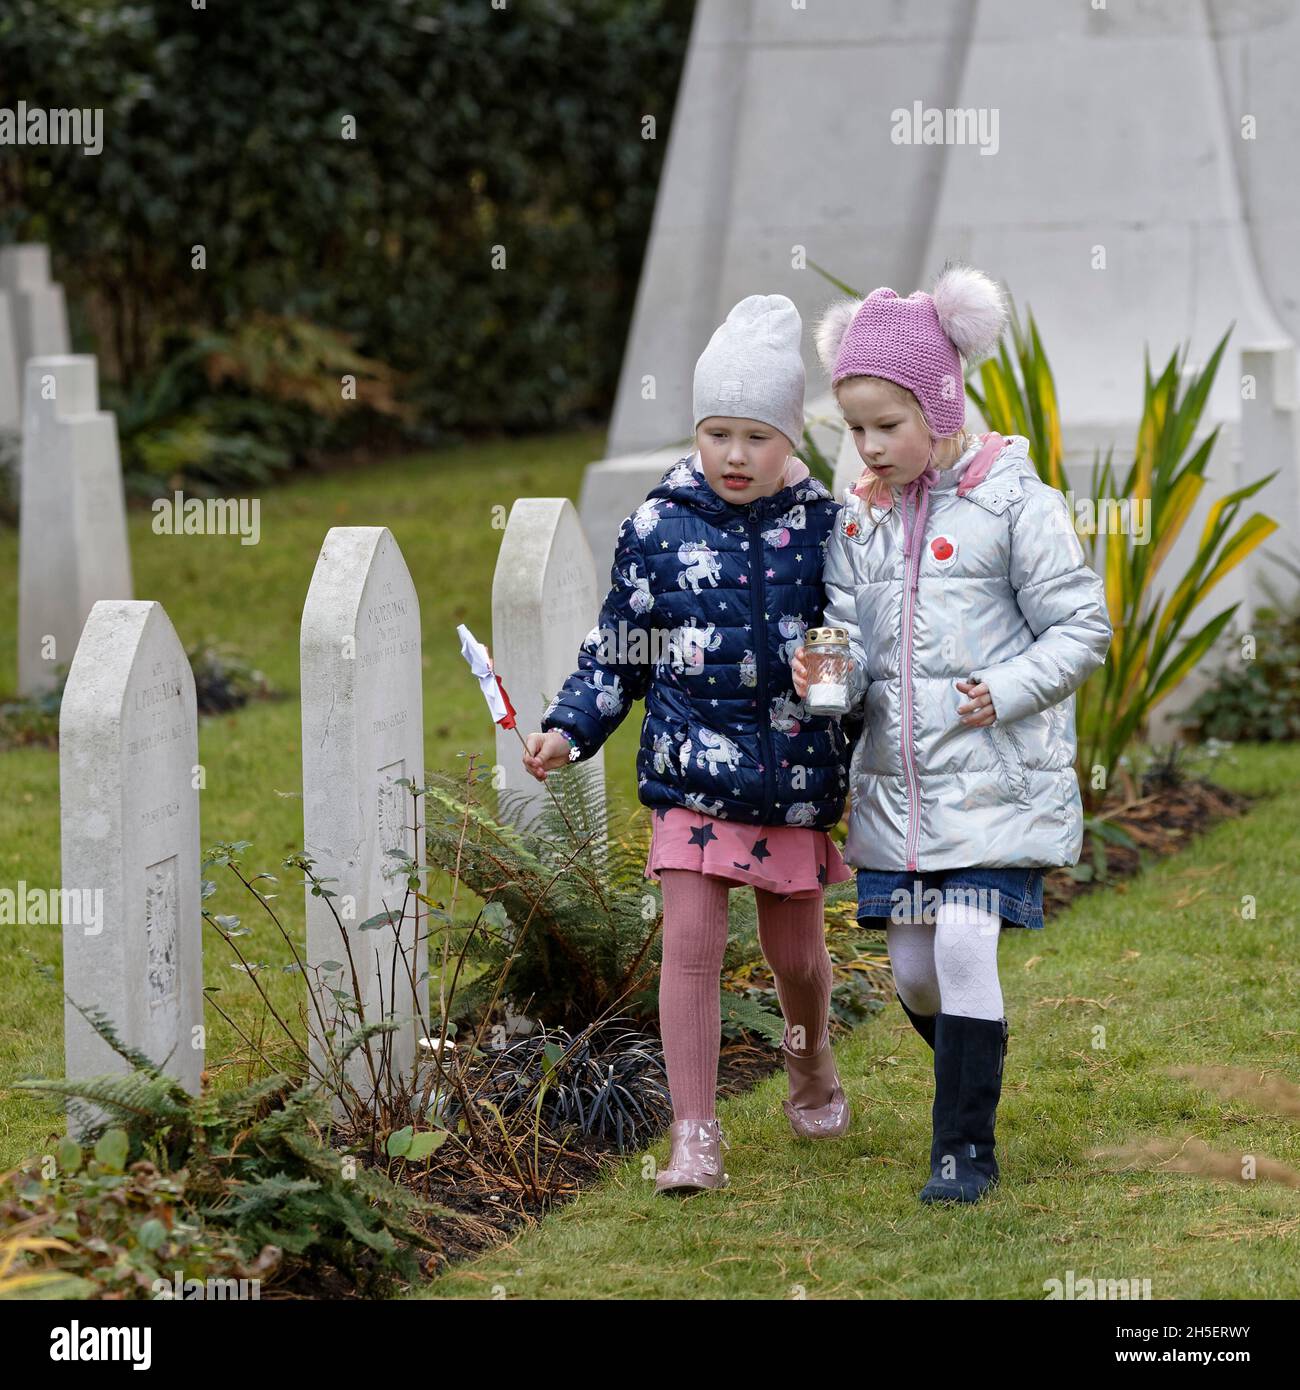 Sunday 7th November 2021. Brookwood Military Cemetery. The local Polish Community gather to remember the fallen and pay their respects. Children place candles & the national colours at headstones in the Polish plot. Stock Photo